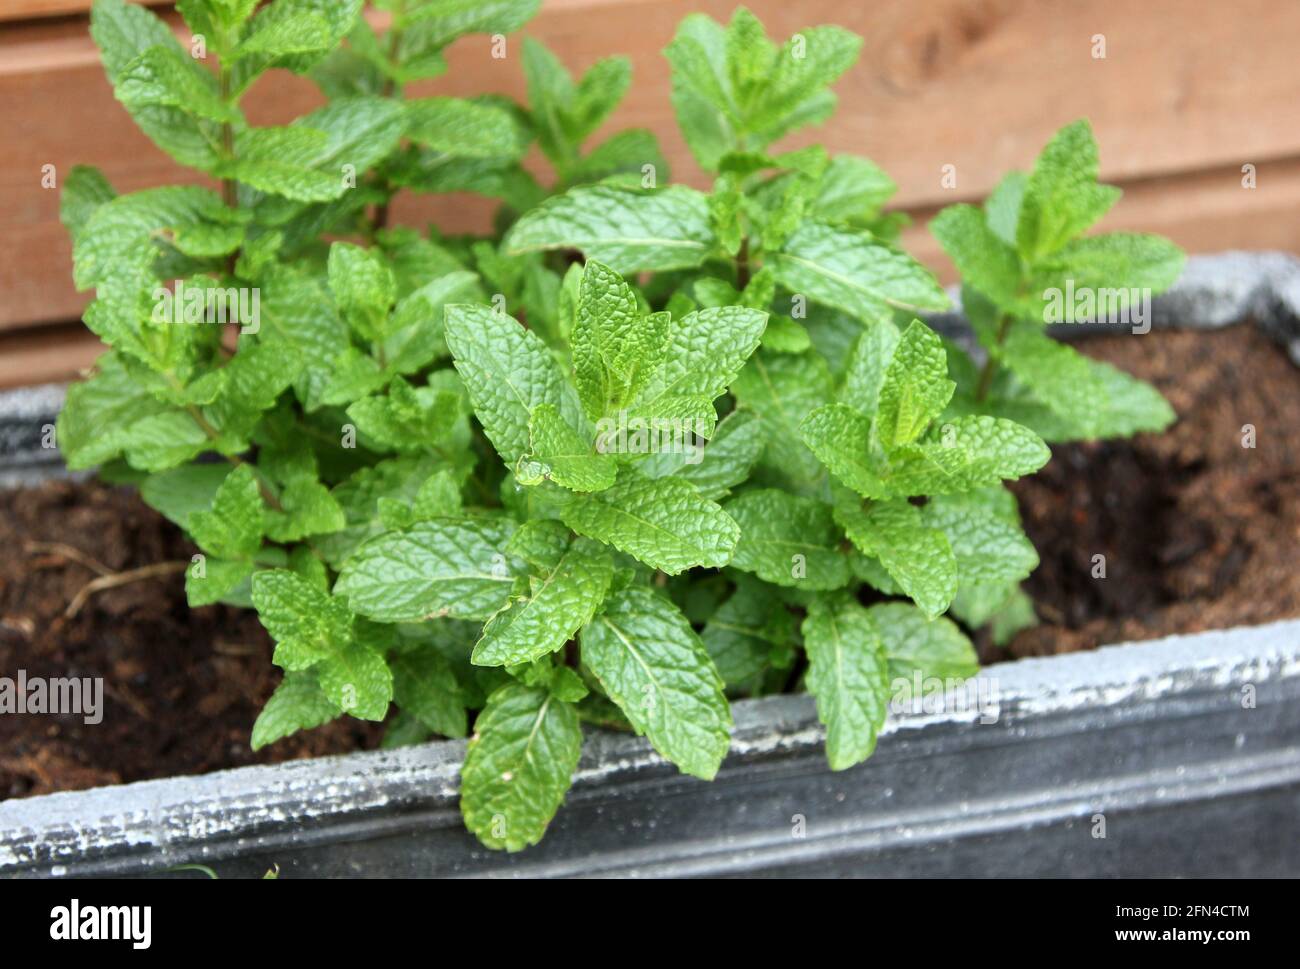 Mint plant growing in a container. Stock Photo